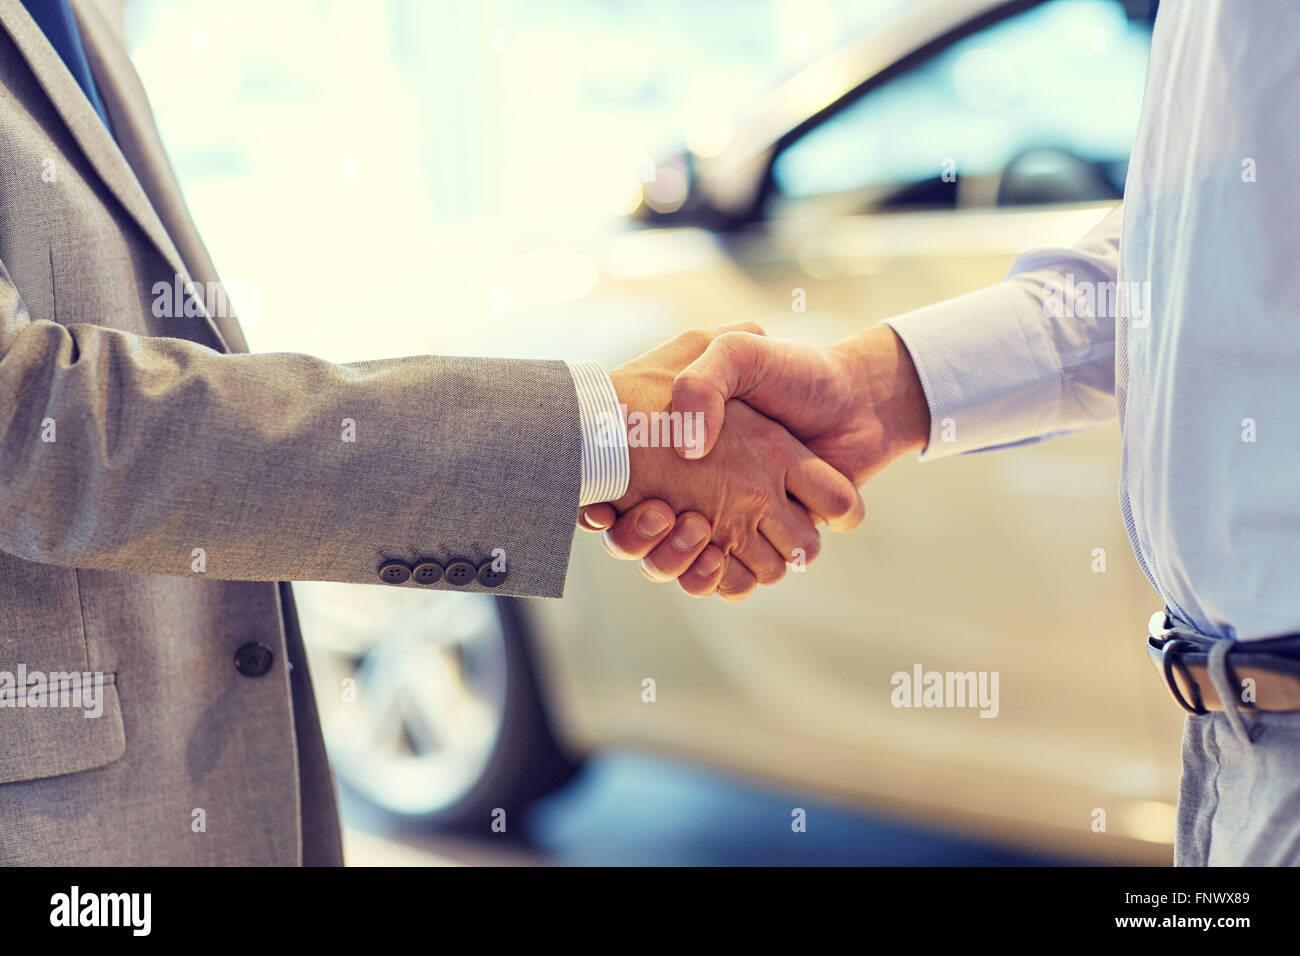 close up of male handshake in auto show or salon Stock Photo